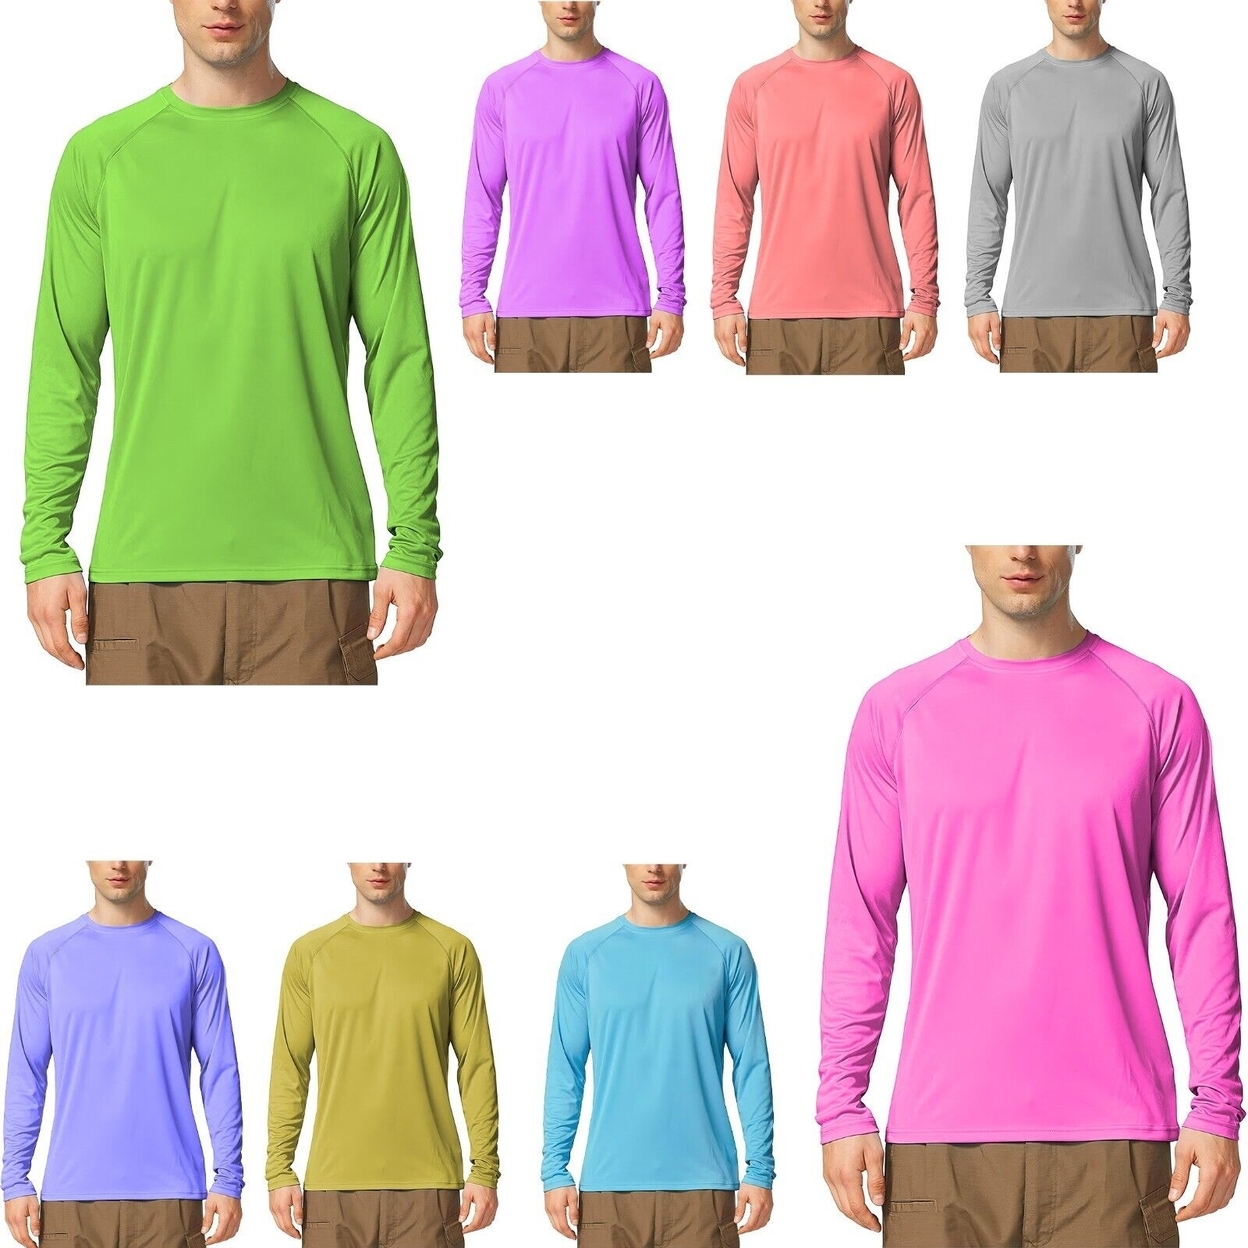 5-Pack: Men's Dri-Fit Moisture Wicking Athletic Cool Performance Slim Fit Long Sleeve T-Shirts - X-large